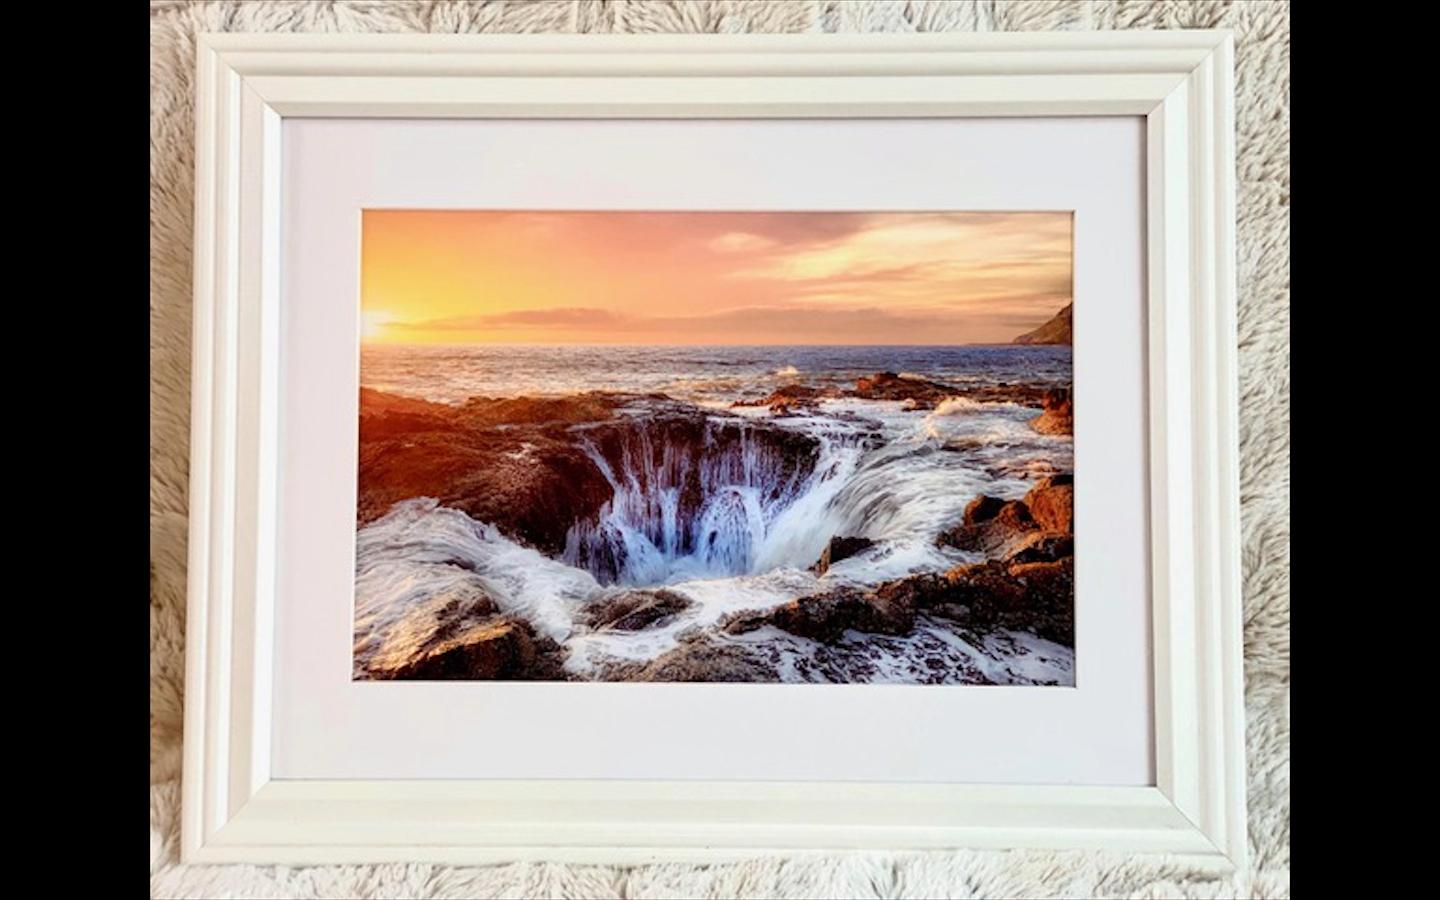 Sunset, Thor’s Well - Photograph by Tim Truby